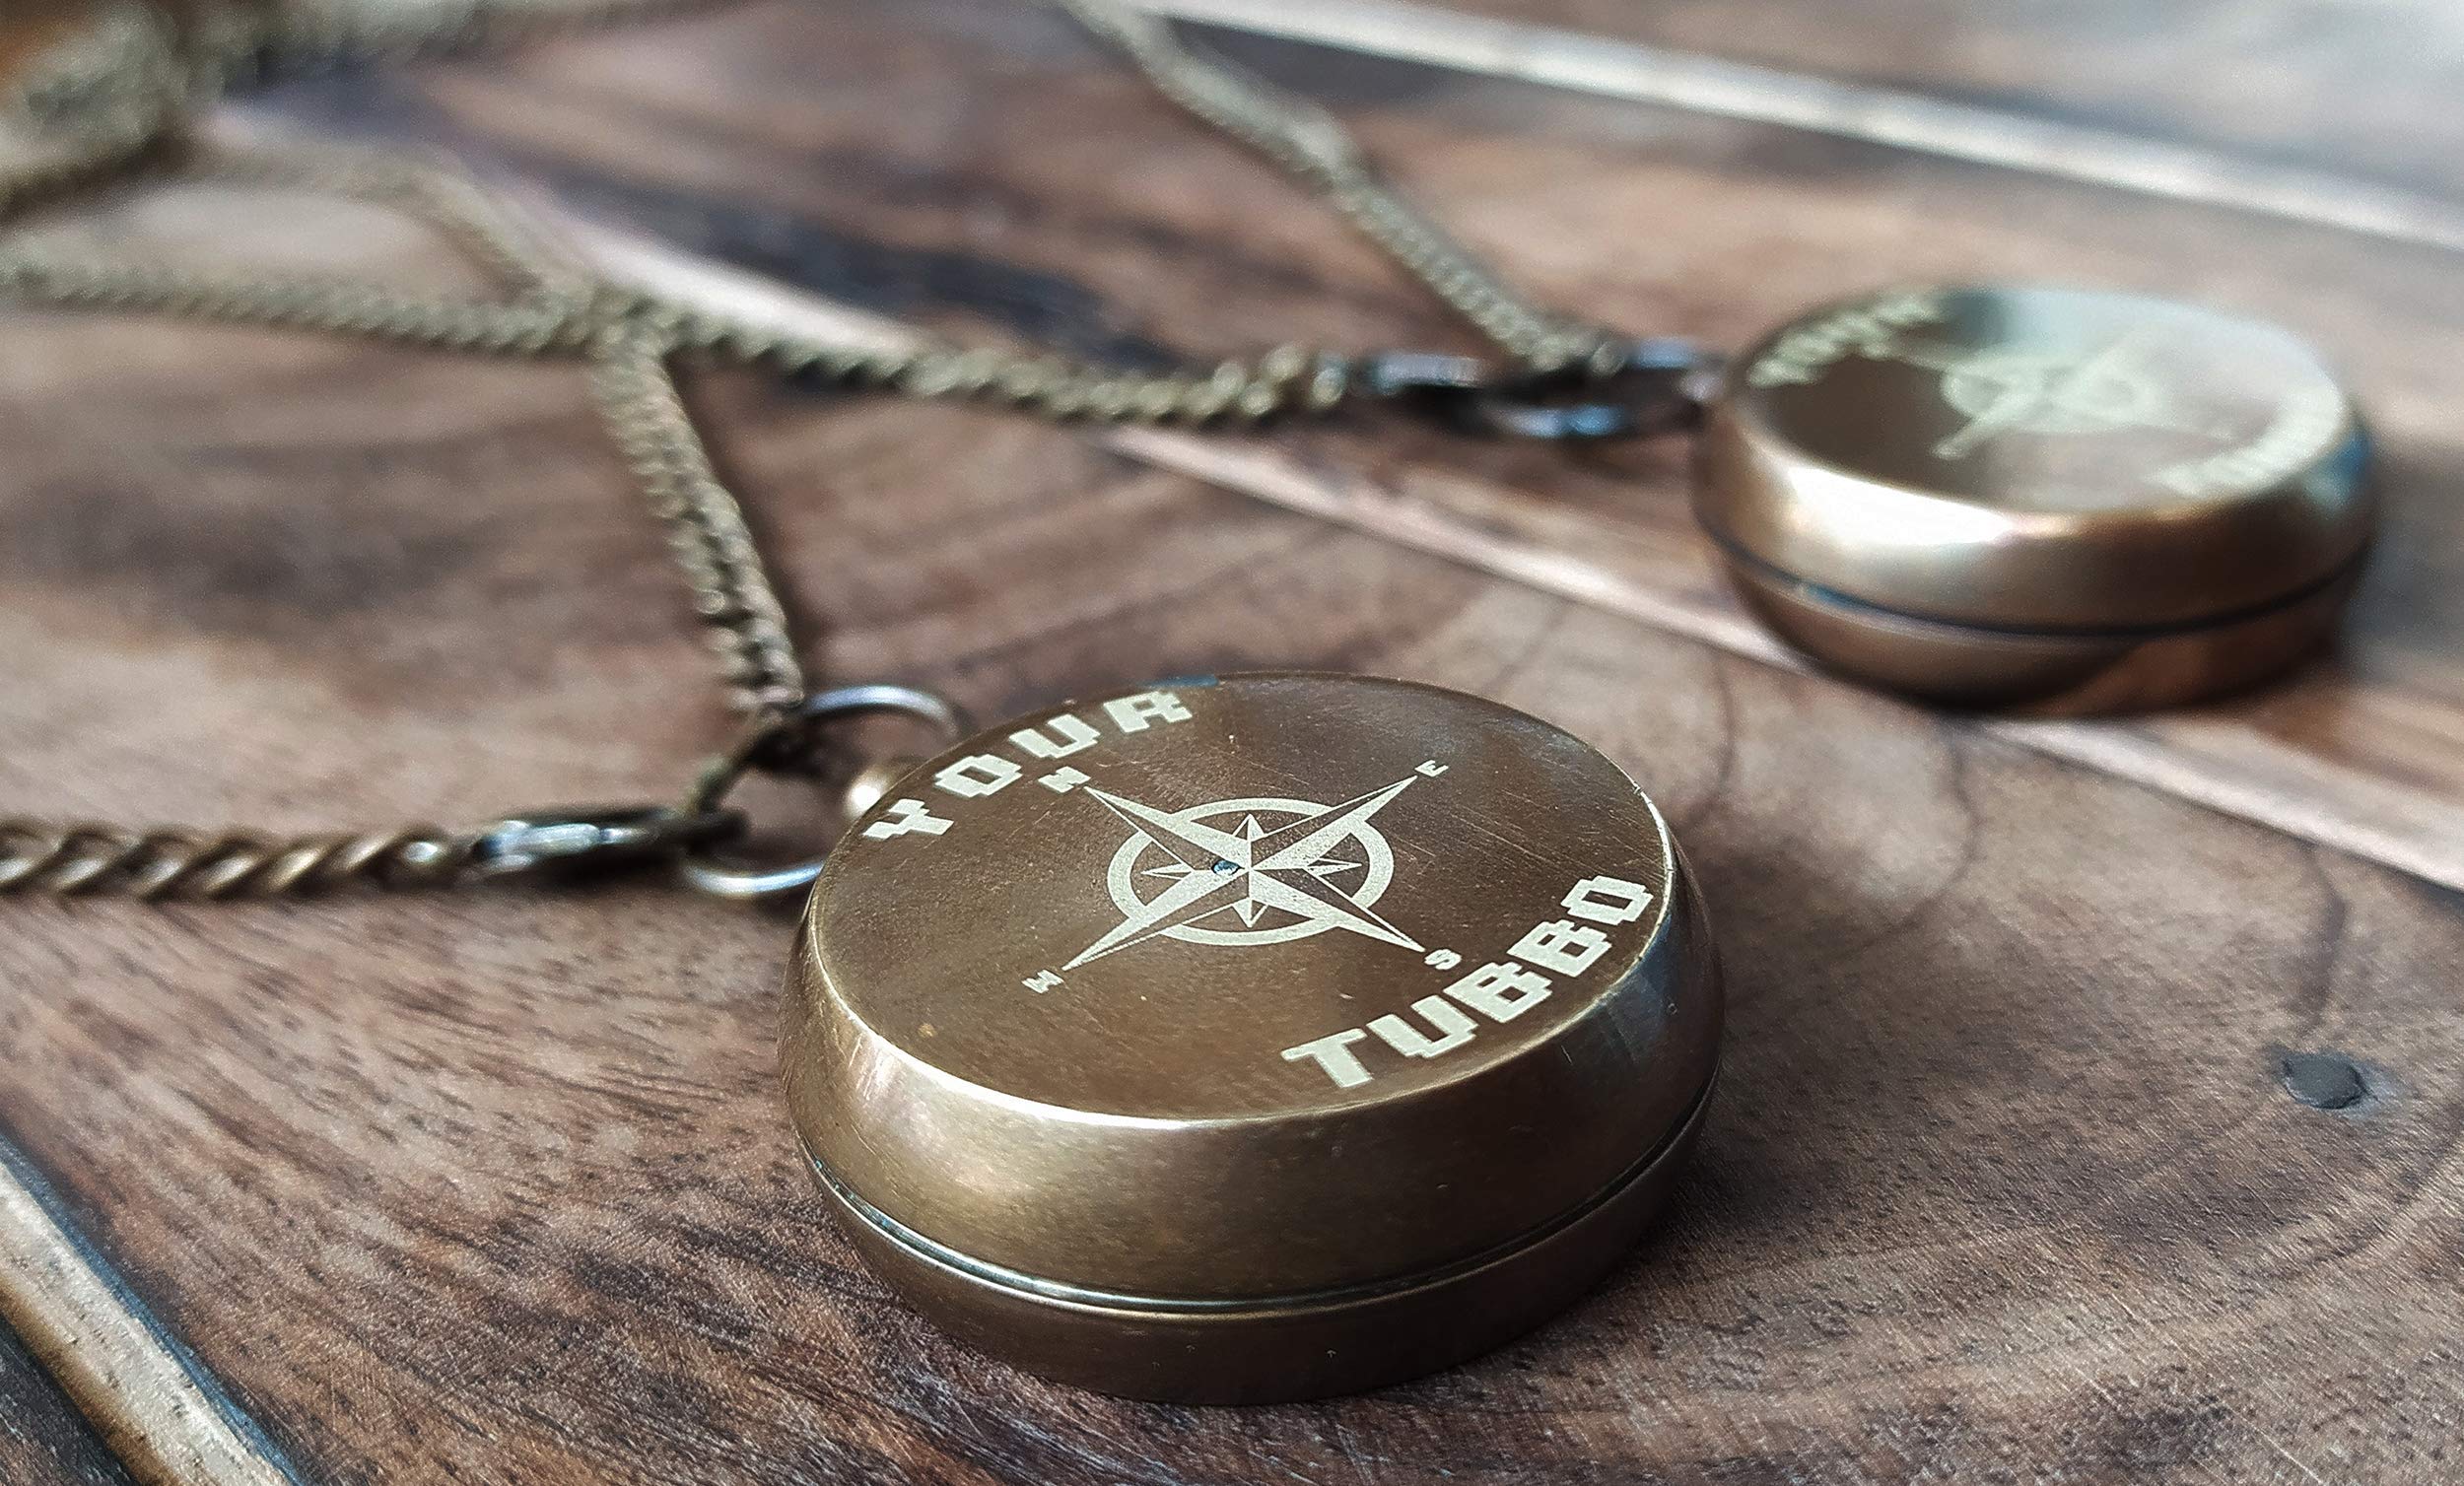 PORTHO Your Tubbo Your Tommy Compass Necklace, Friendship Love Pendent Compass, Your Tubbo Compass Locket Mine-Craft, mcyt, mine-craft love, 2d games lover